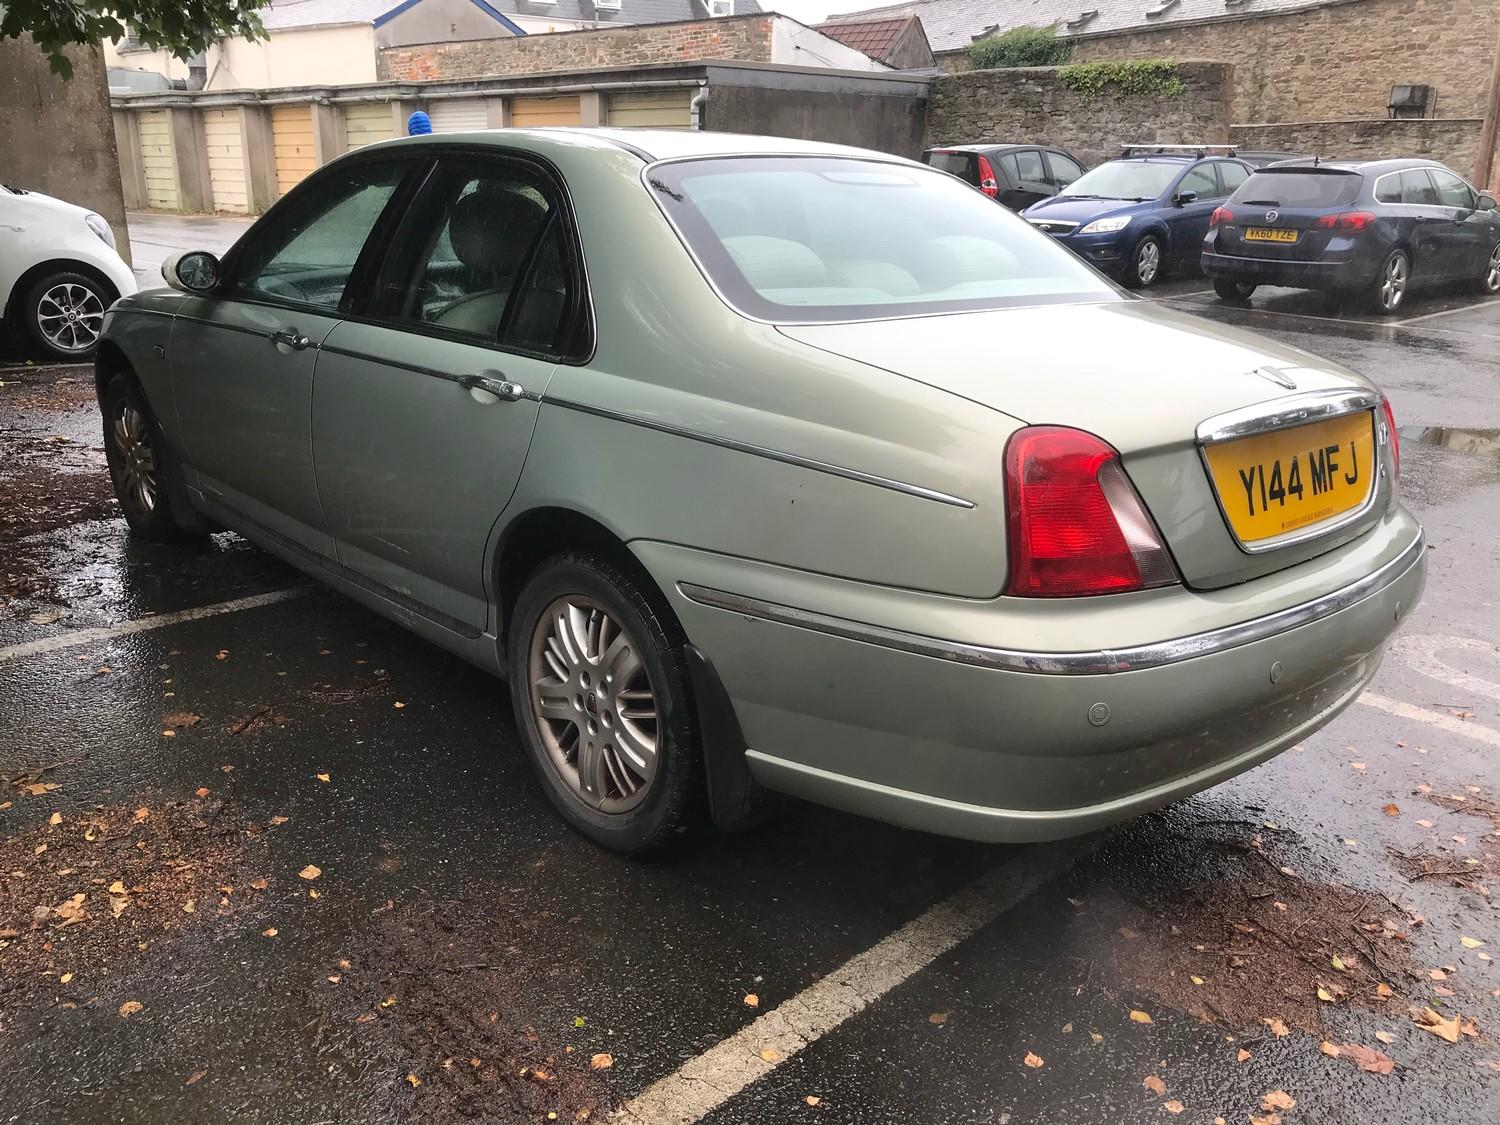 Rover 75 2.0V6 Connoisseur Y144MFJ Only 17k miles from new. One family owned from new. MOT 5 July - Image 3 of 9